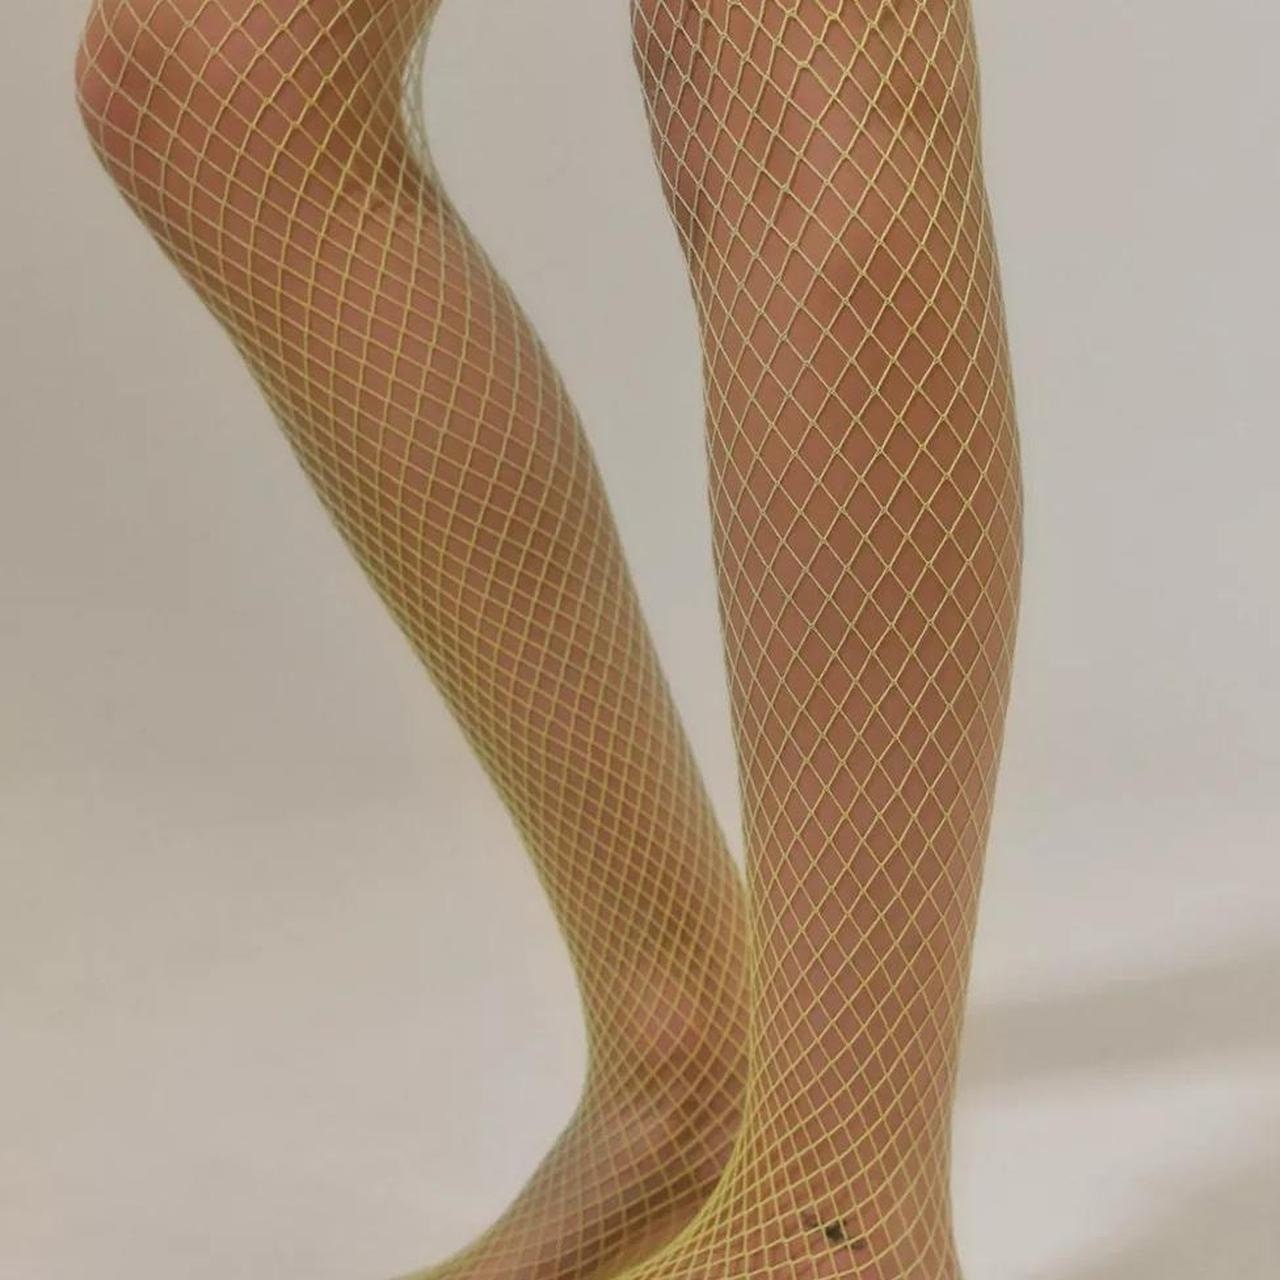 Simply Joshimo Diamond Patterned Black Footless Fishnet Tights in